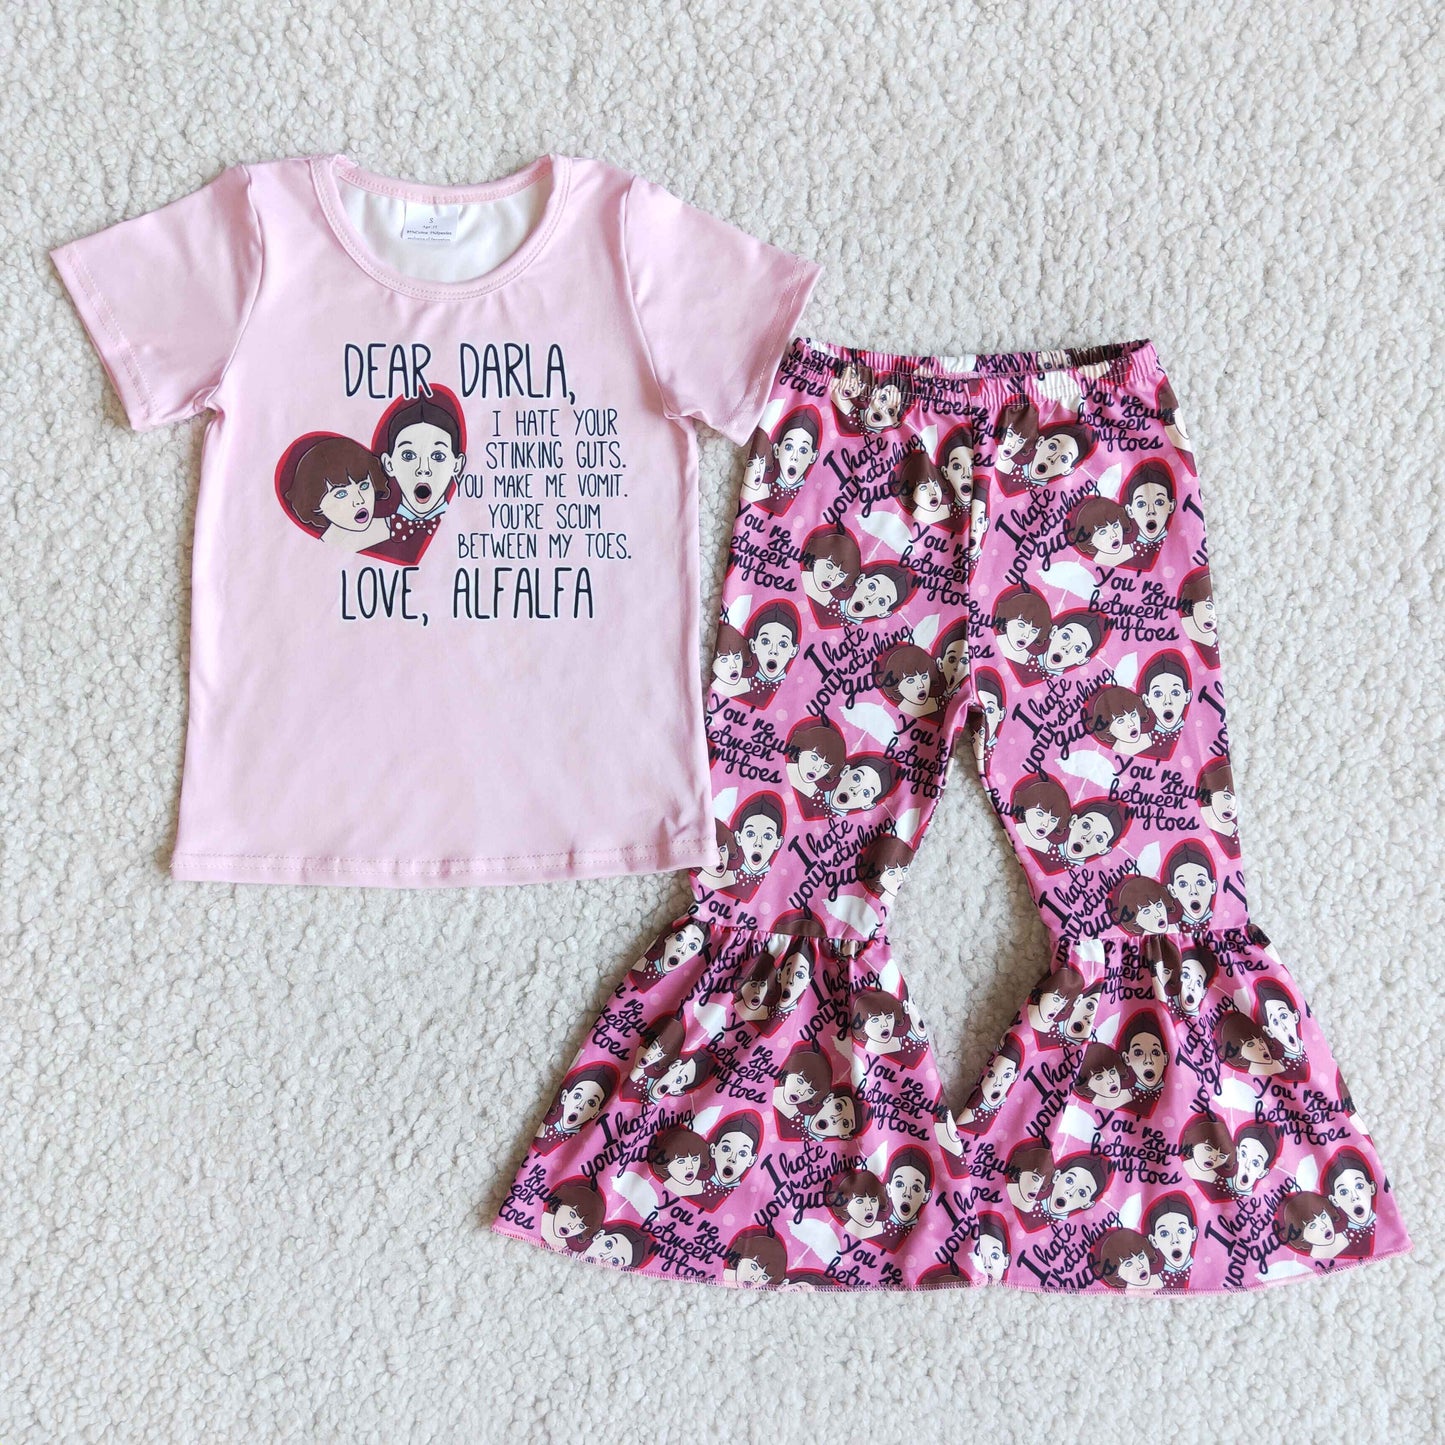 Girls cartoon love letters outfit